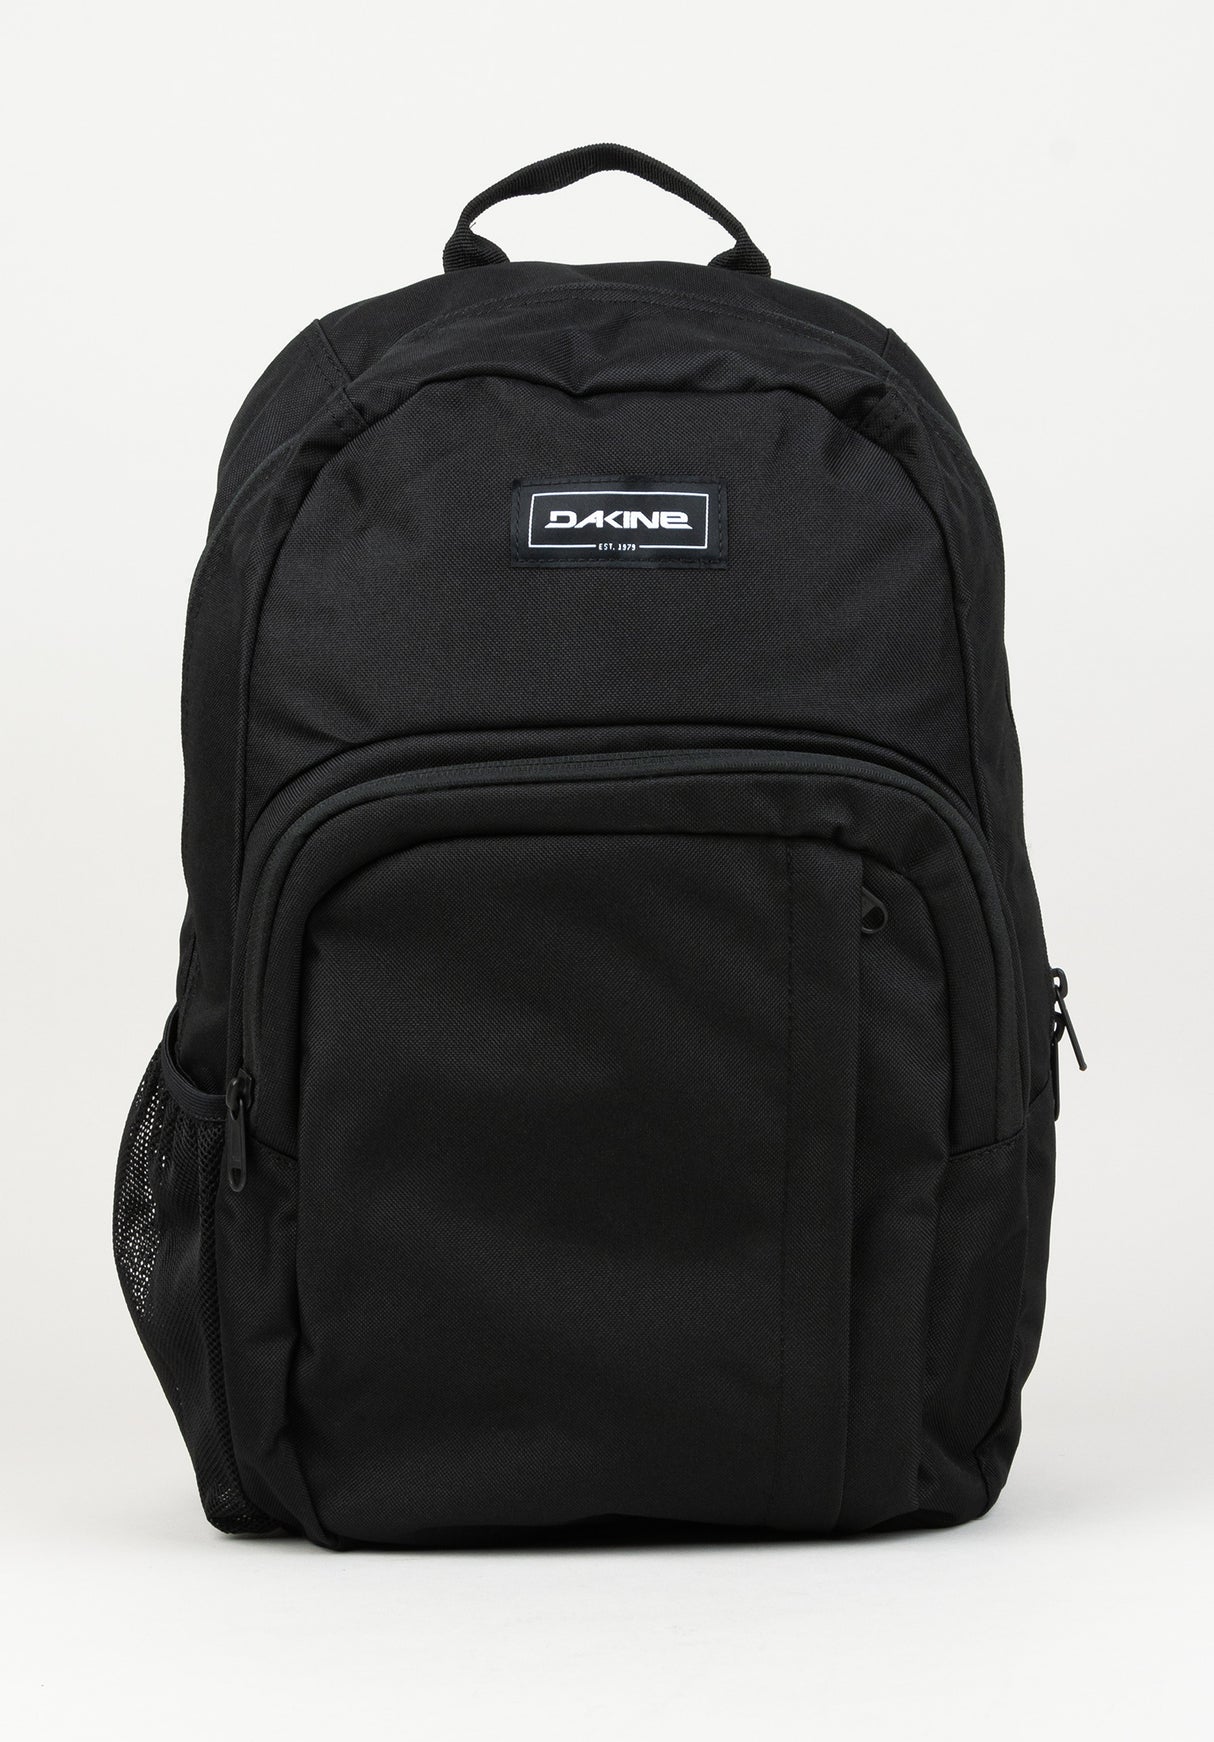 Dakine Campus M Backpack - Black II - 25L - Used - Acceptable - Ourland  Outdoor